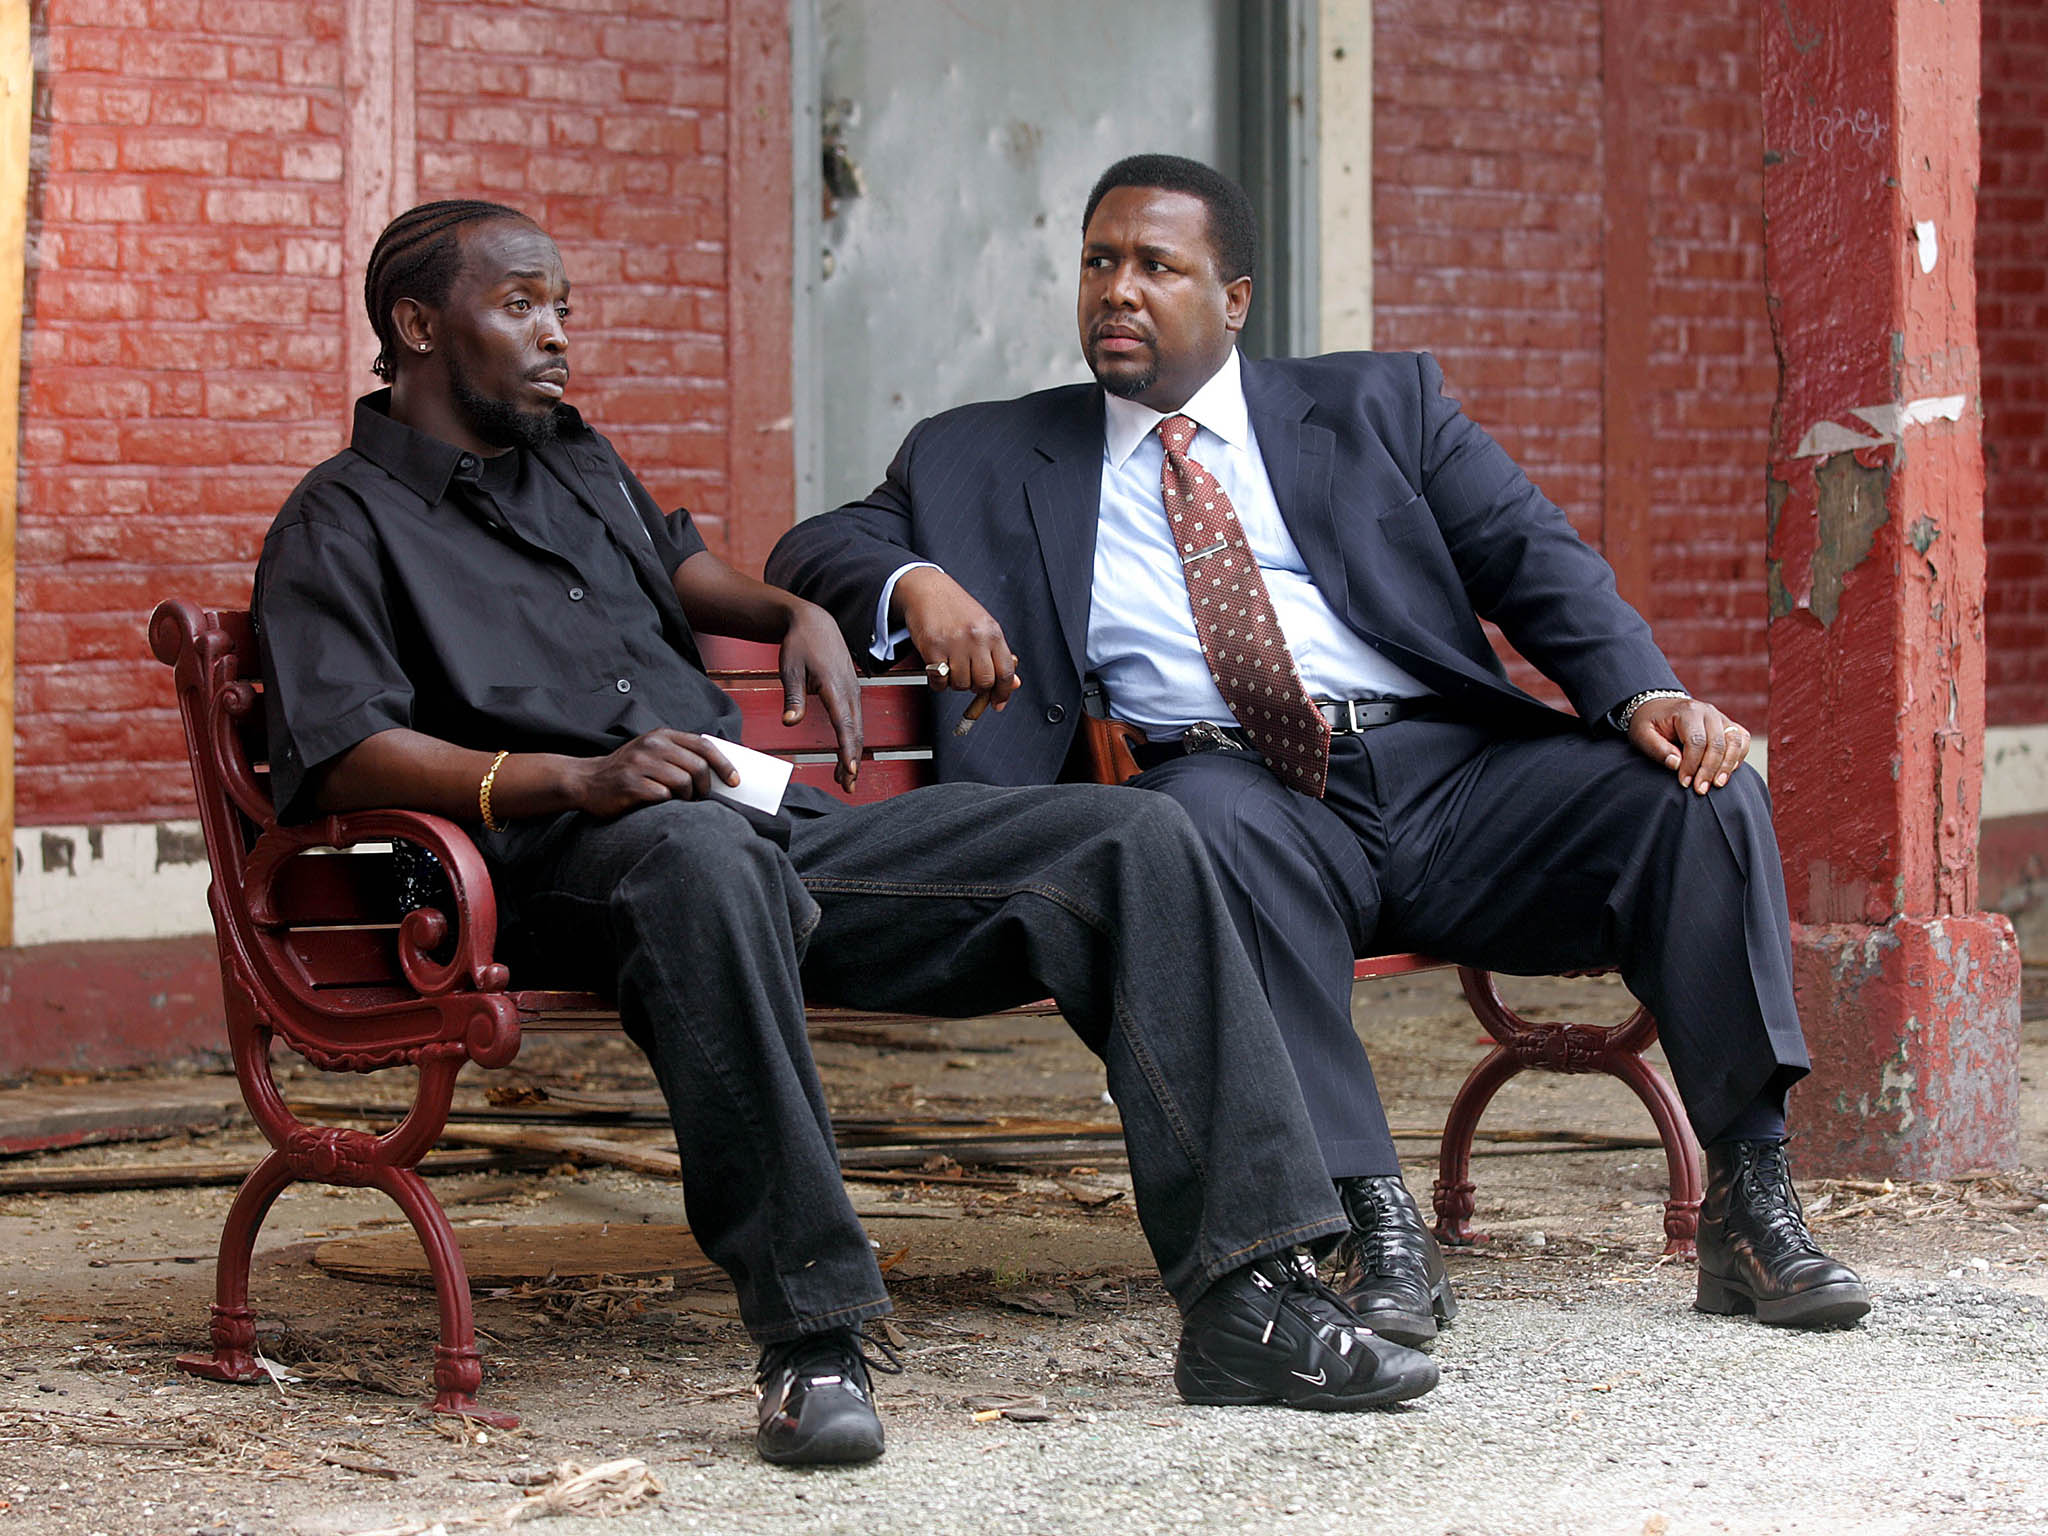 The Wire: Every Episode, Ranked Worst to Best